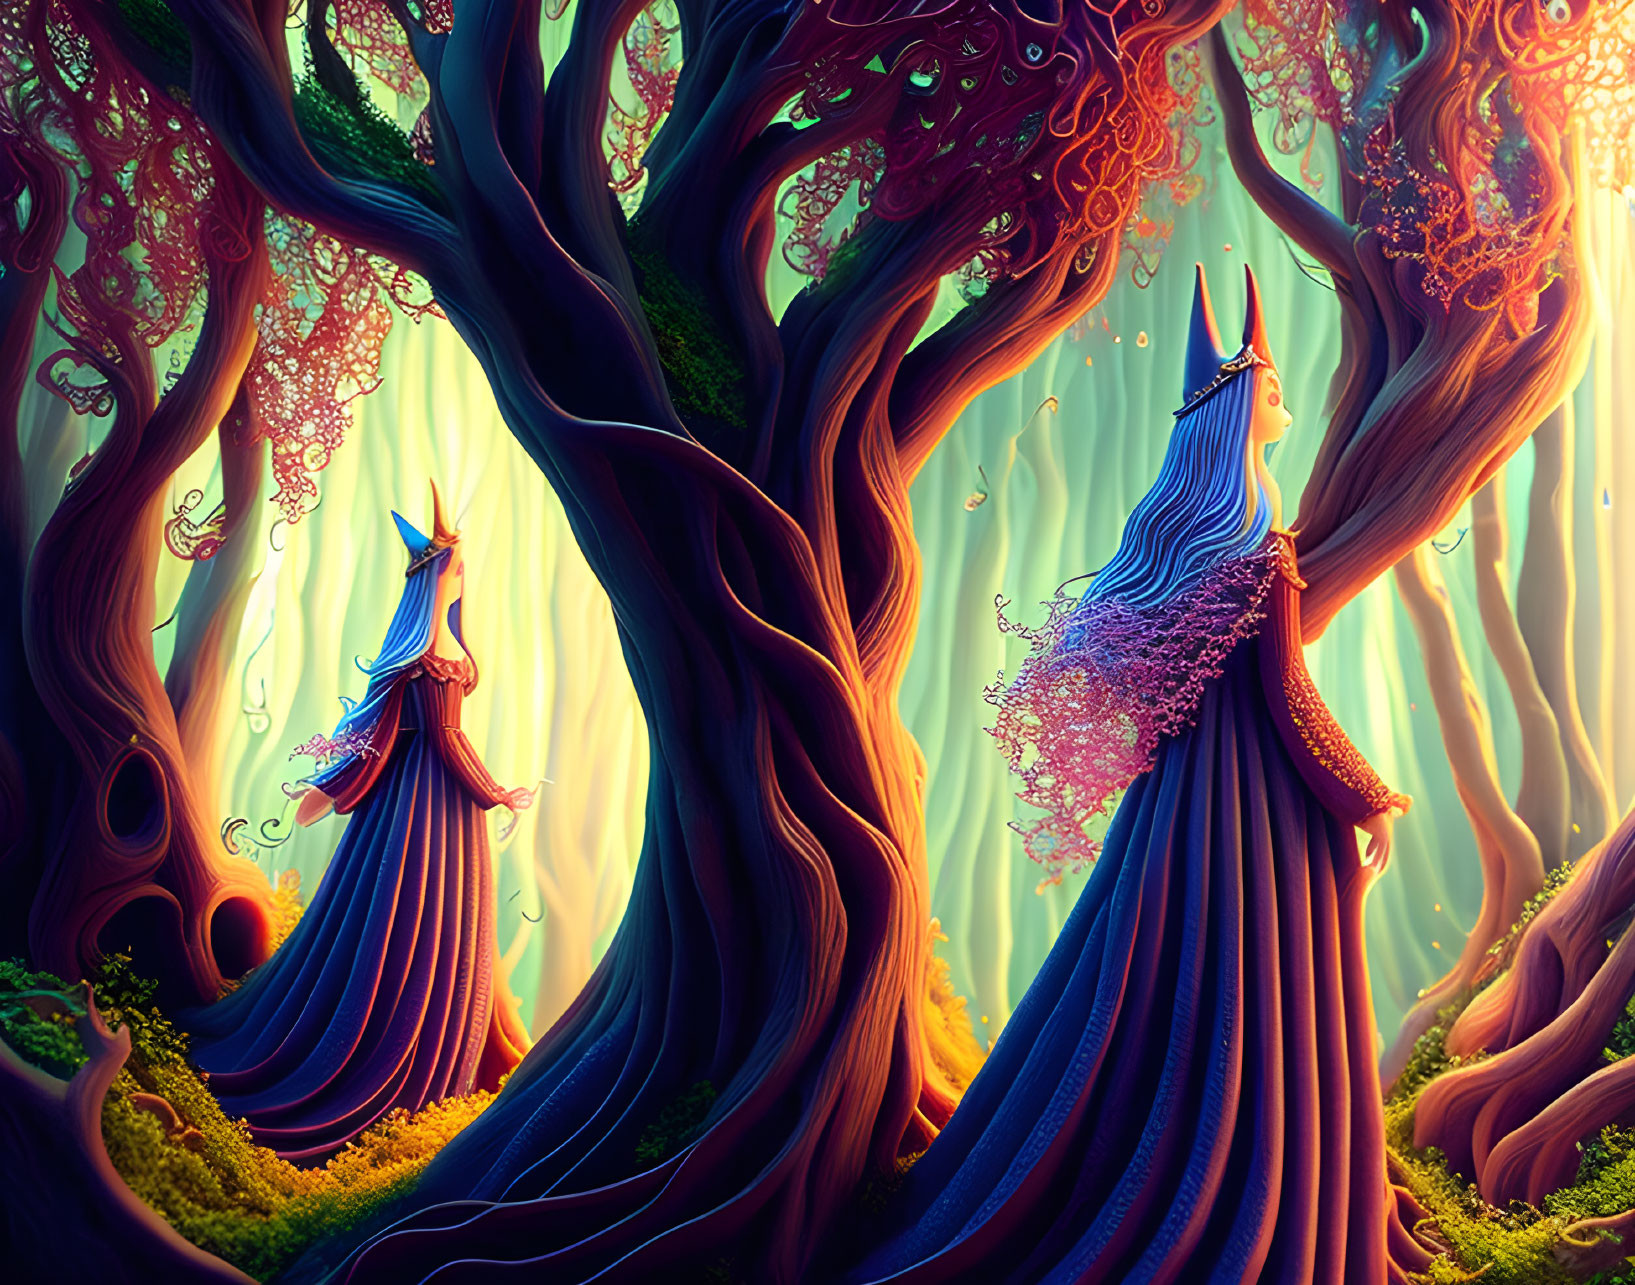 Fantasy illustration of two figures in elegant robes in magical forest